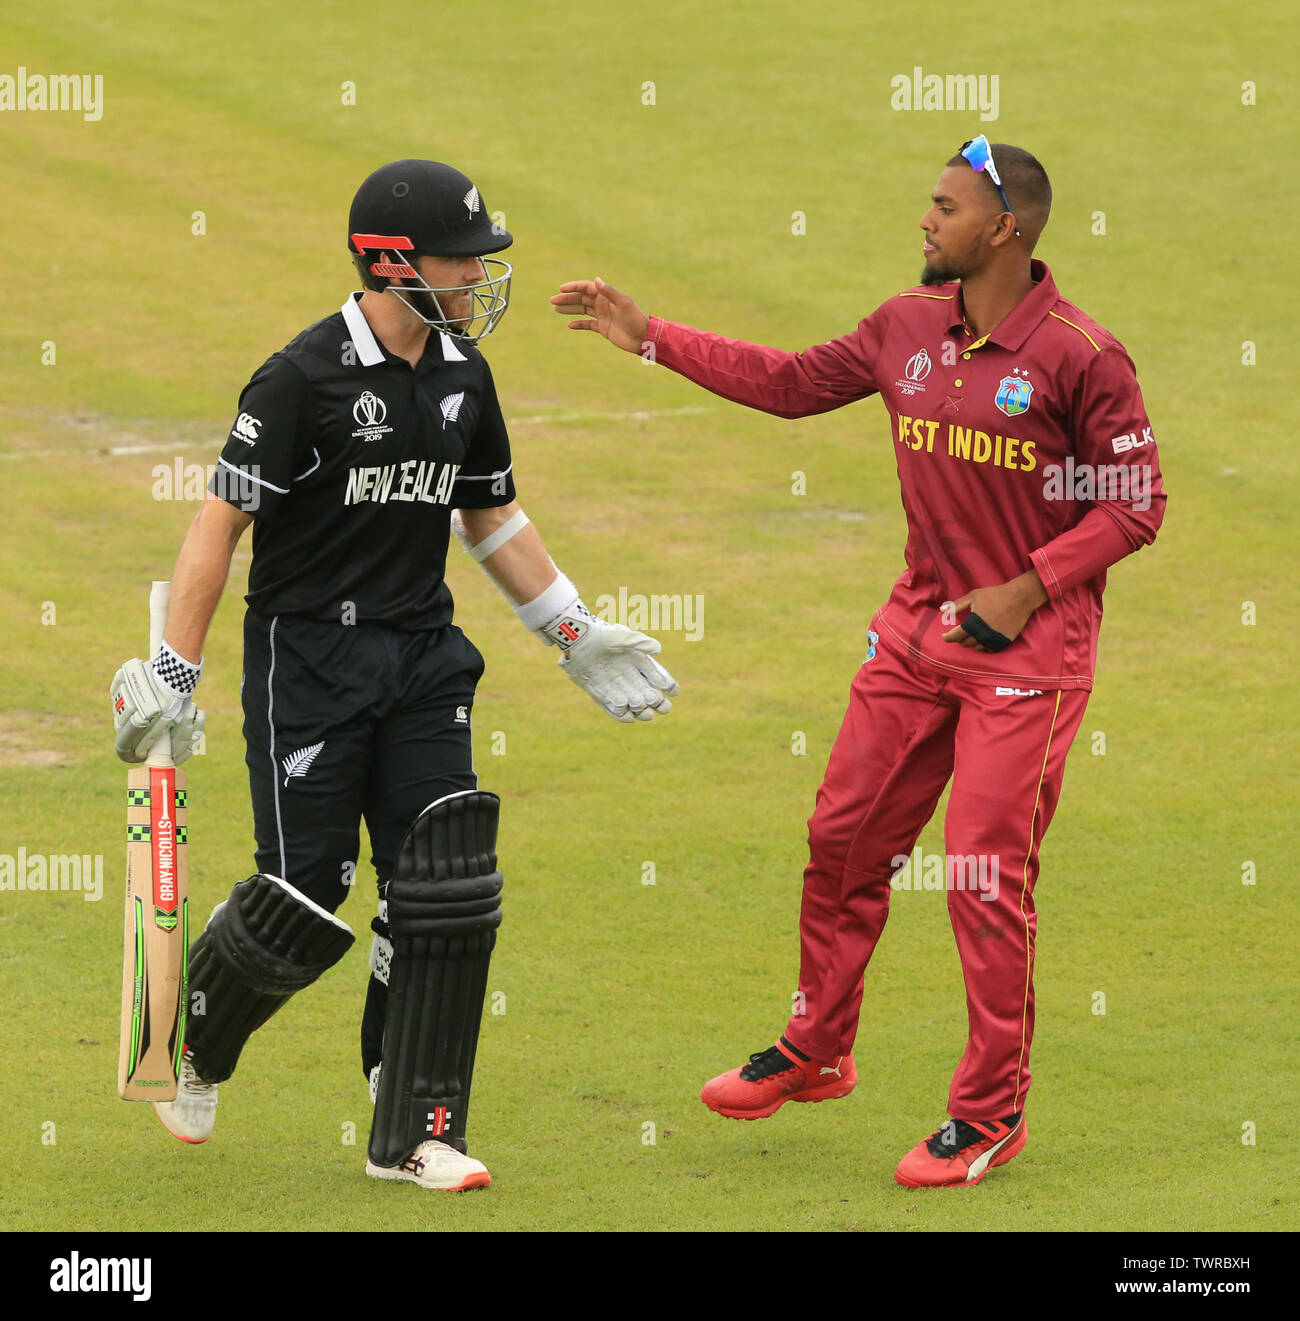 MANCHESTER, ENGLAND. 22 JUNE 2019: Nicholas Pooran of West Indies congratulates Kane Williamson of New Zealand after he was dosmissed for his best ODI score of 148 runs during the West Indies v New Zealand, ICC Cricket World Cup match, at Old Trafford, Manchester, England. Stock Photo